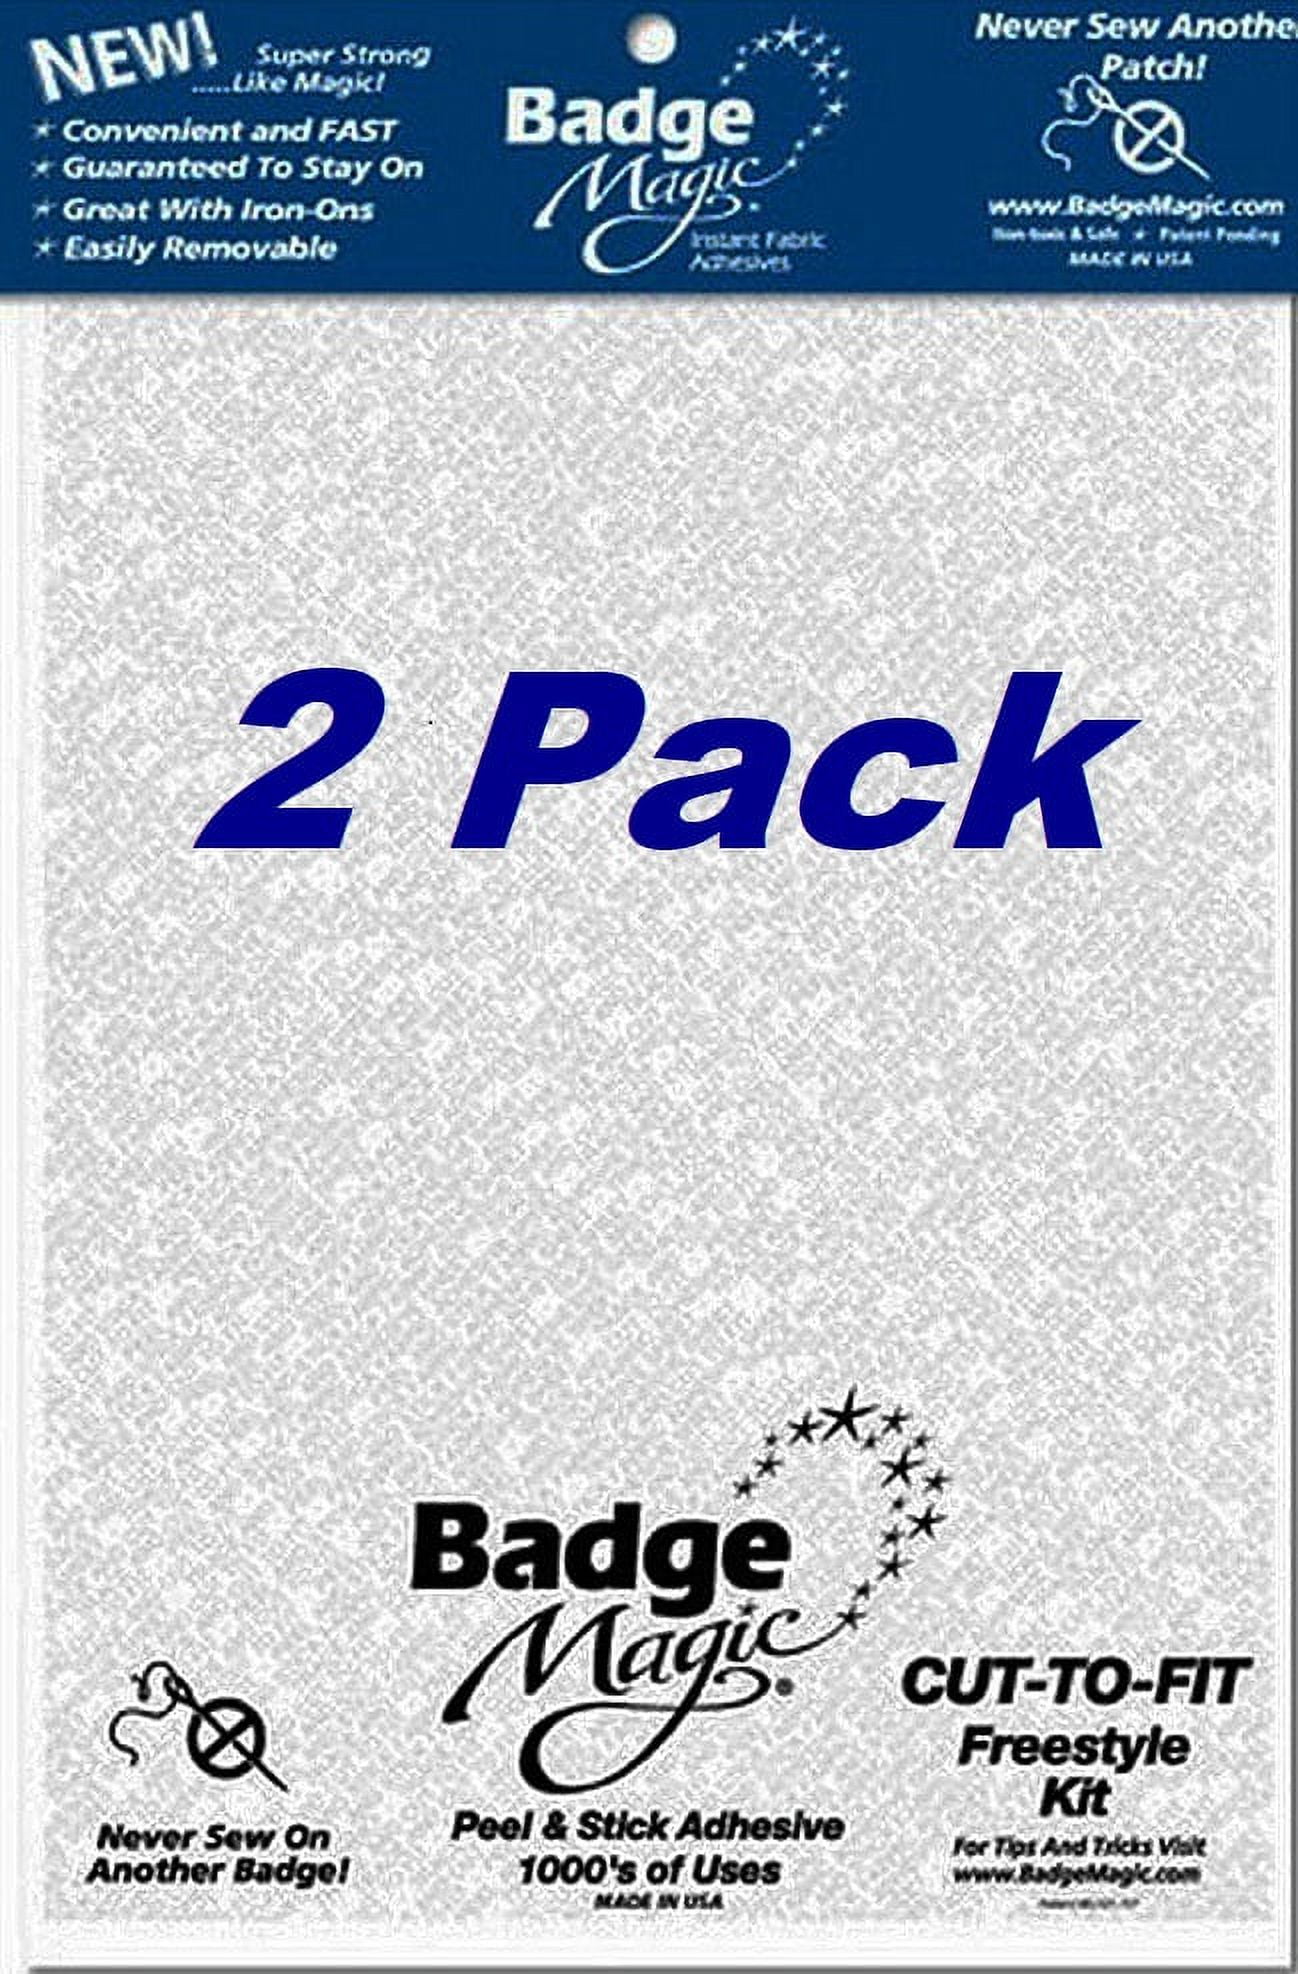 2 Pack Badge Magic Patch Attach Adhesive Boy Scouts Military Sports Patches